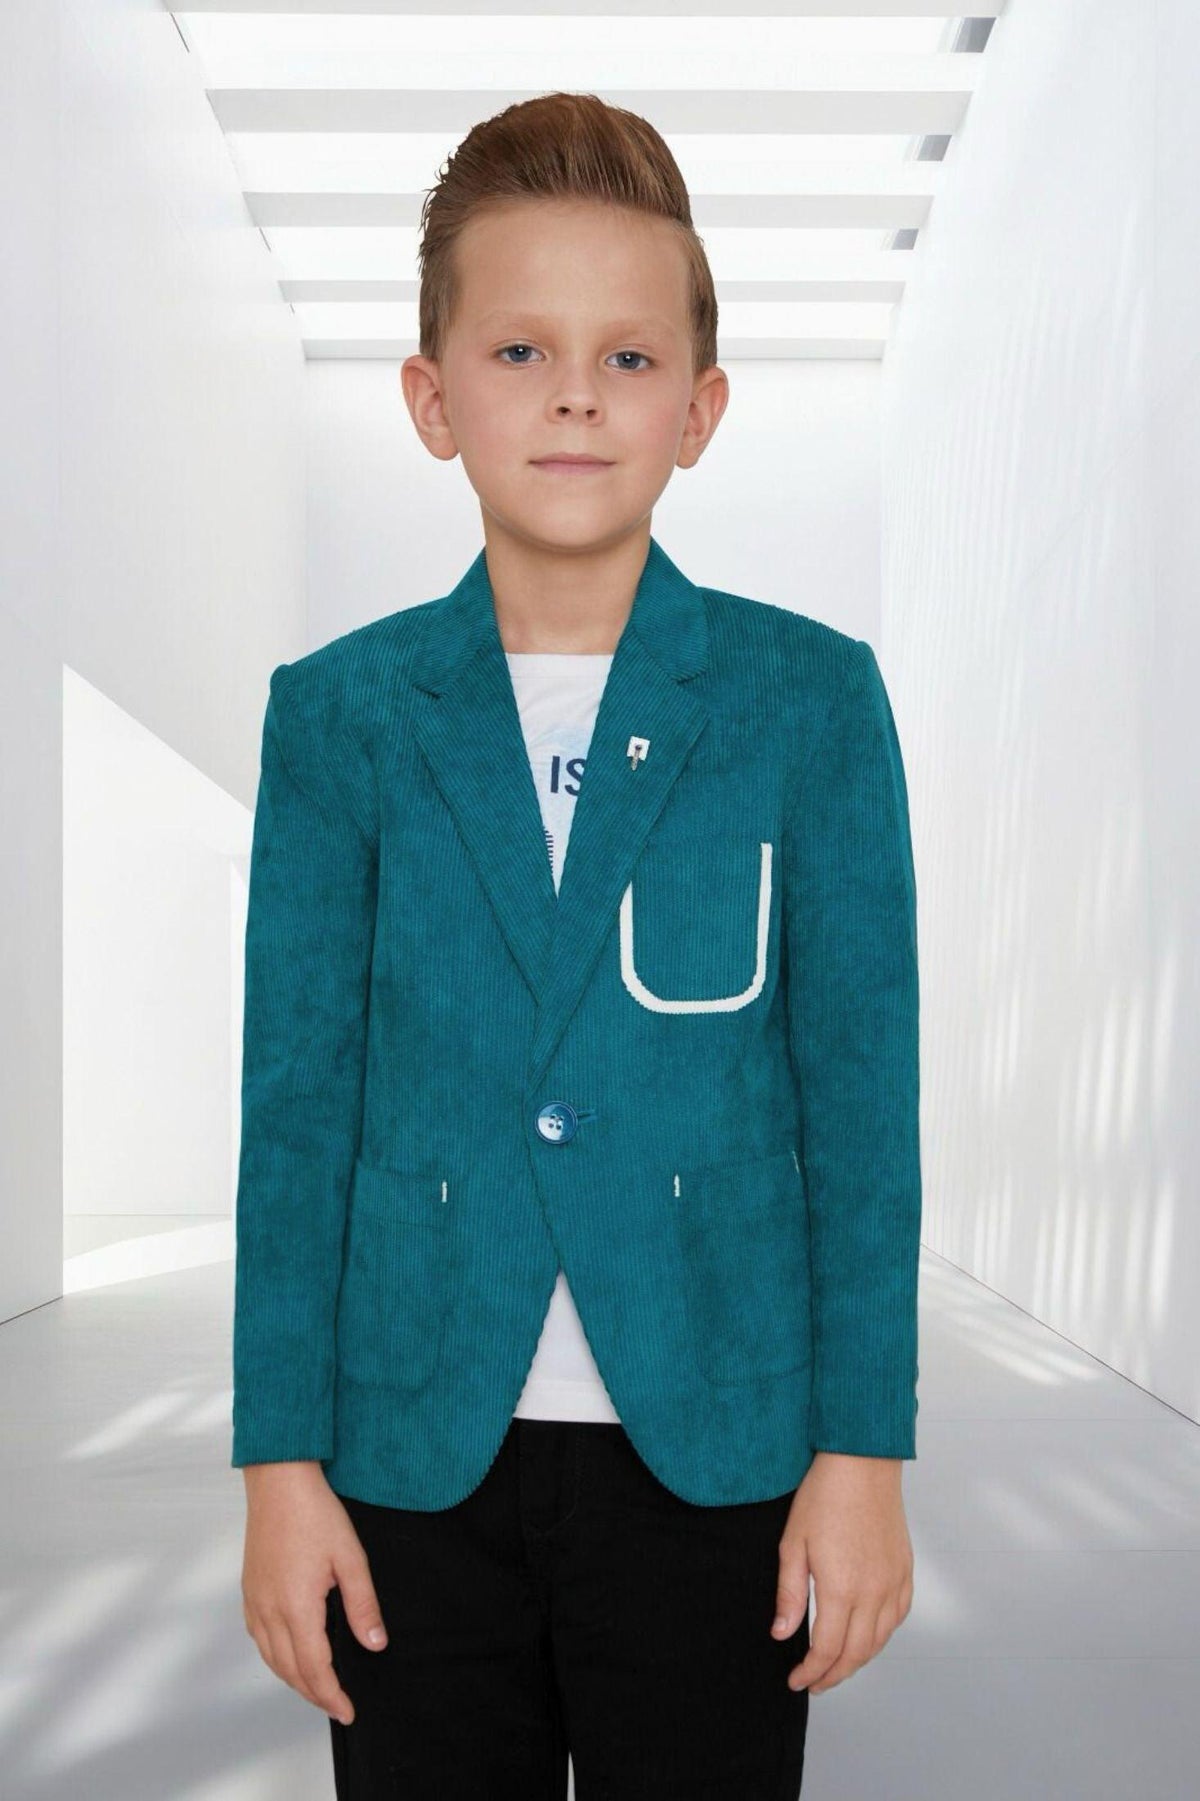 Teal Blue Blazer With White Printed T-shirt For Boys - Lagorii Kids